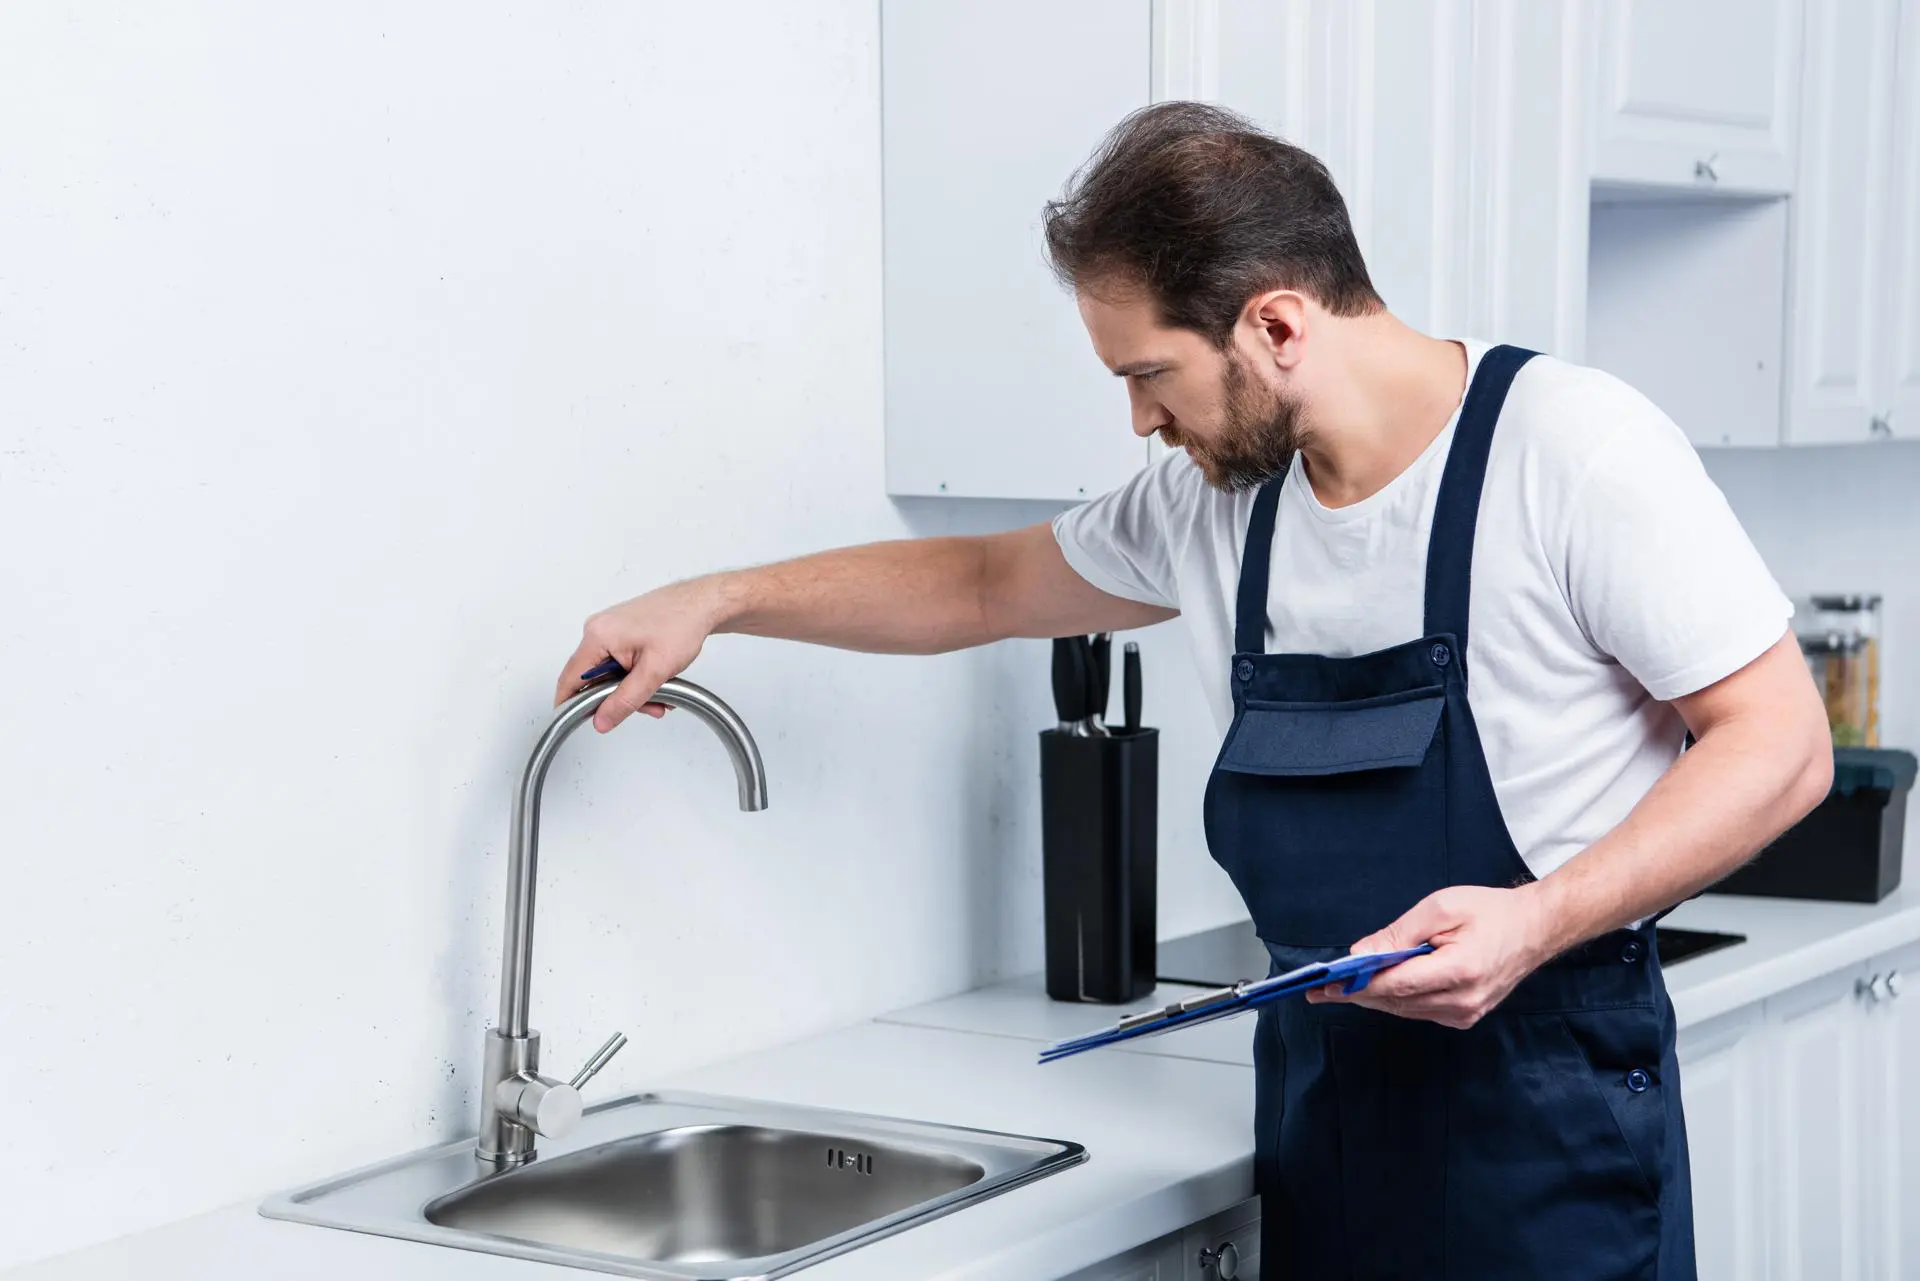 24 Hour Plumber in Toledo, OH: Your Go-To Guide for Round-the-Clock Plumbing Services